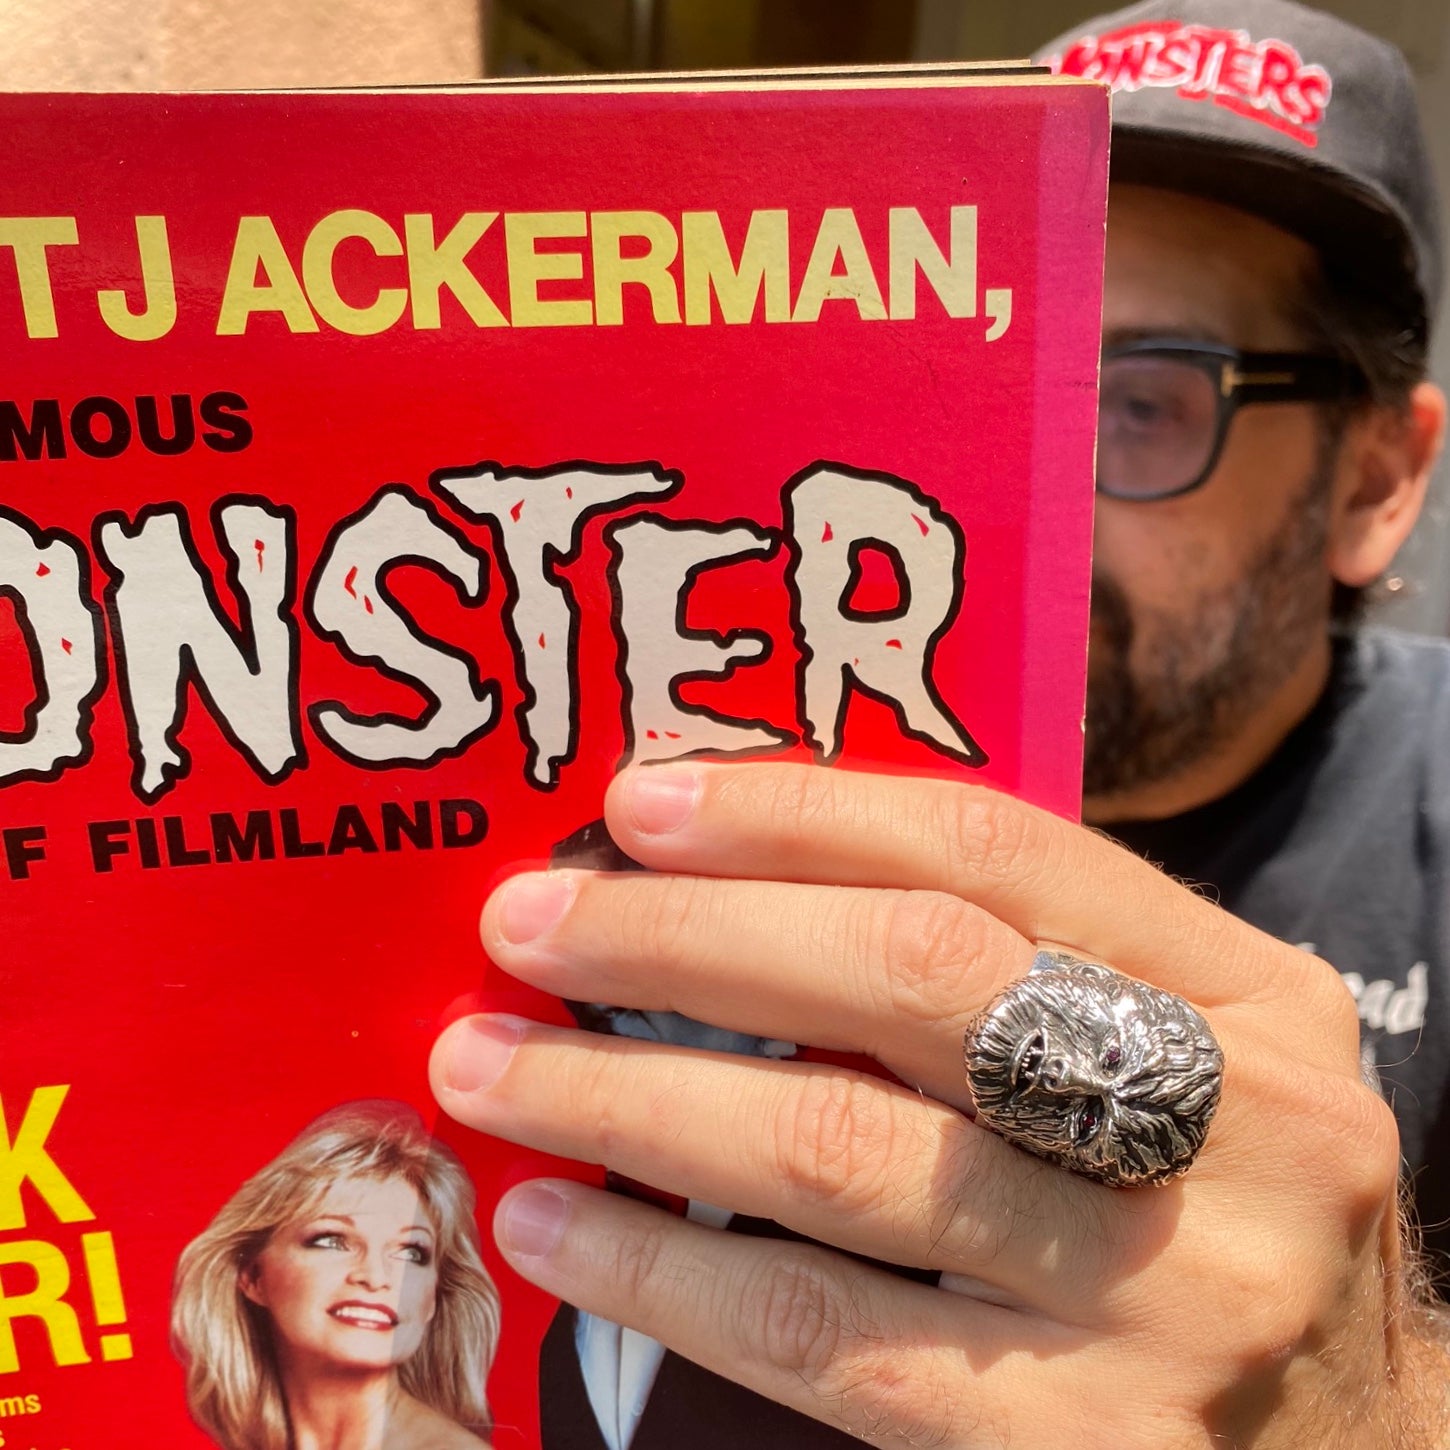 Famous monster magazine wolfman ring red ruby stones with monster hat